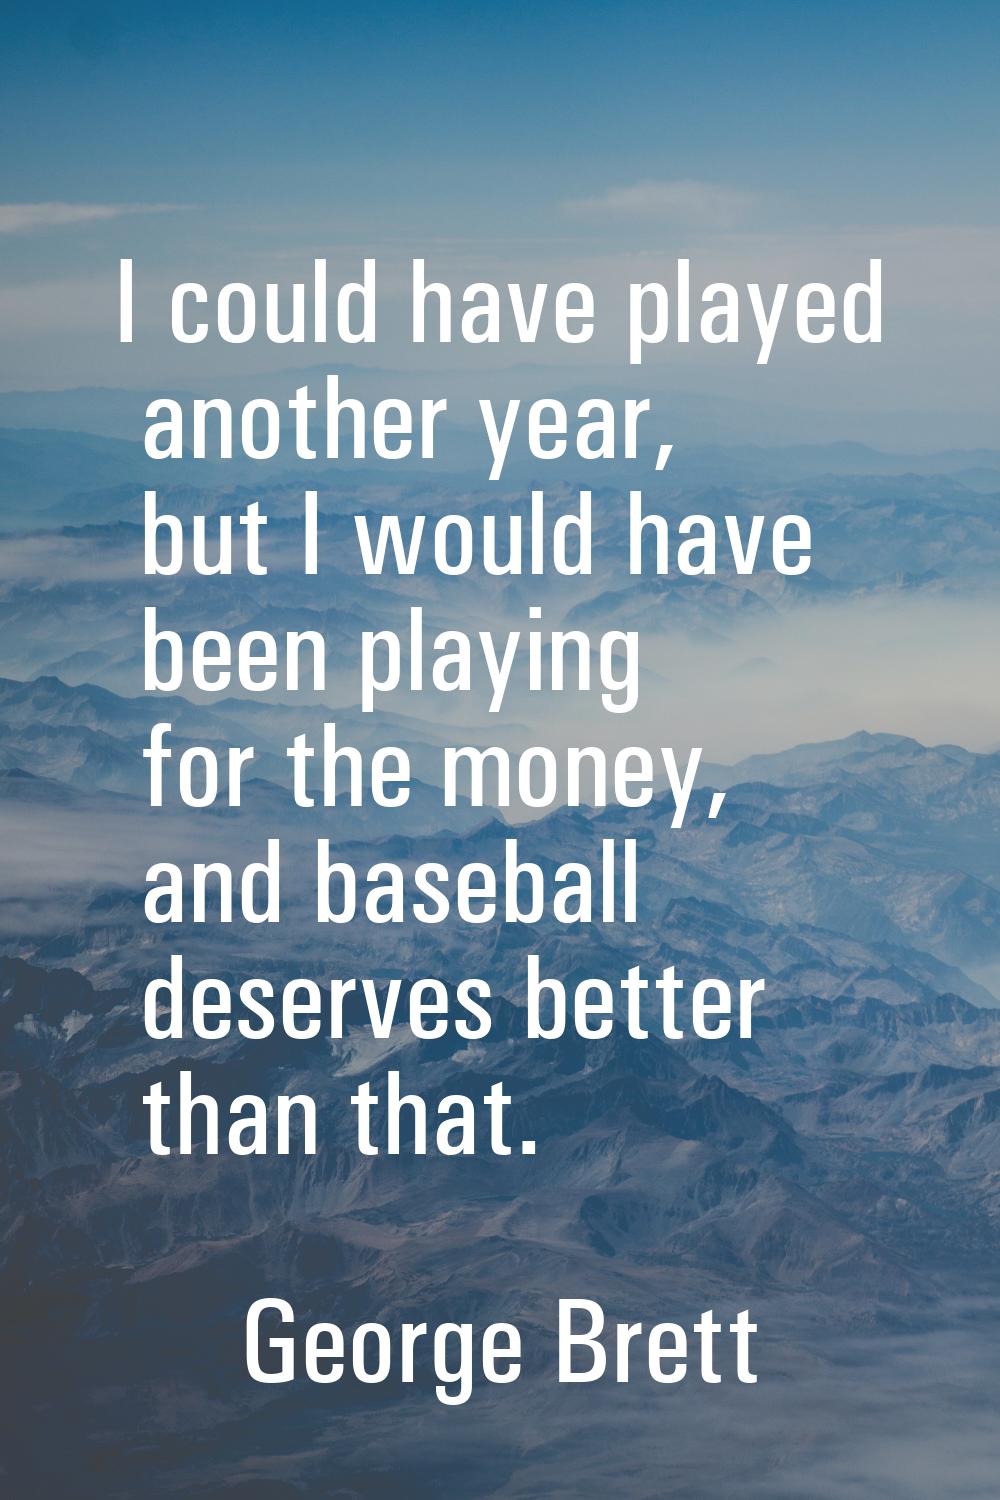 I could have played another year, but I would have been playing for the money, and baseball deserve